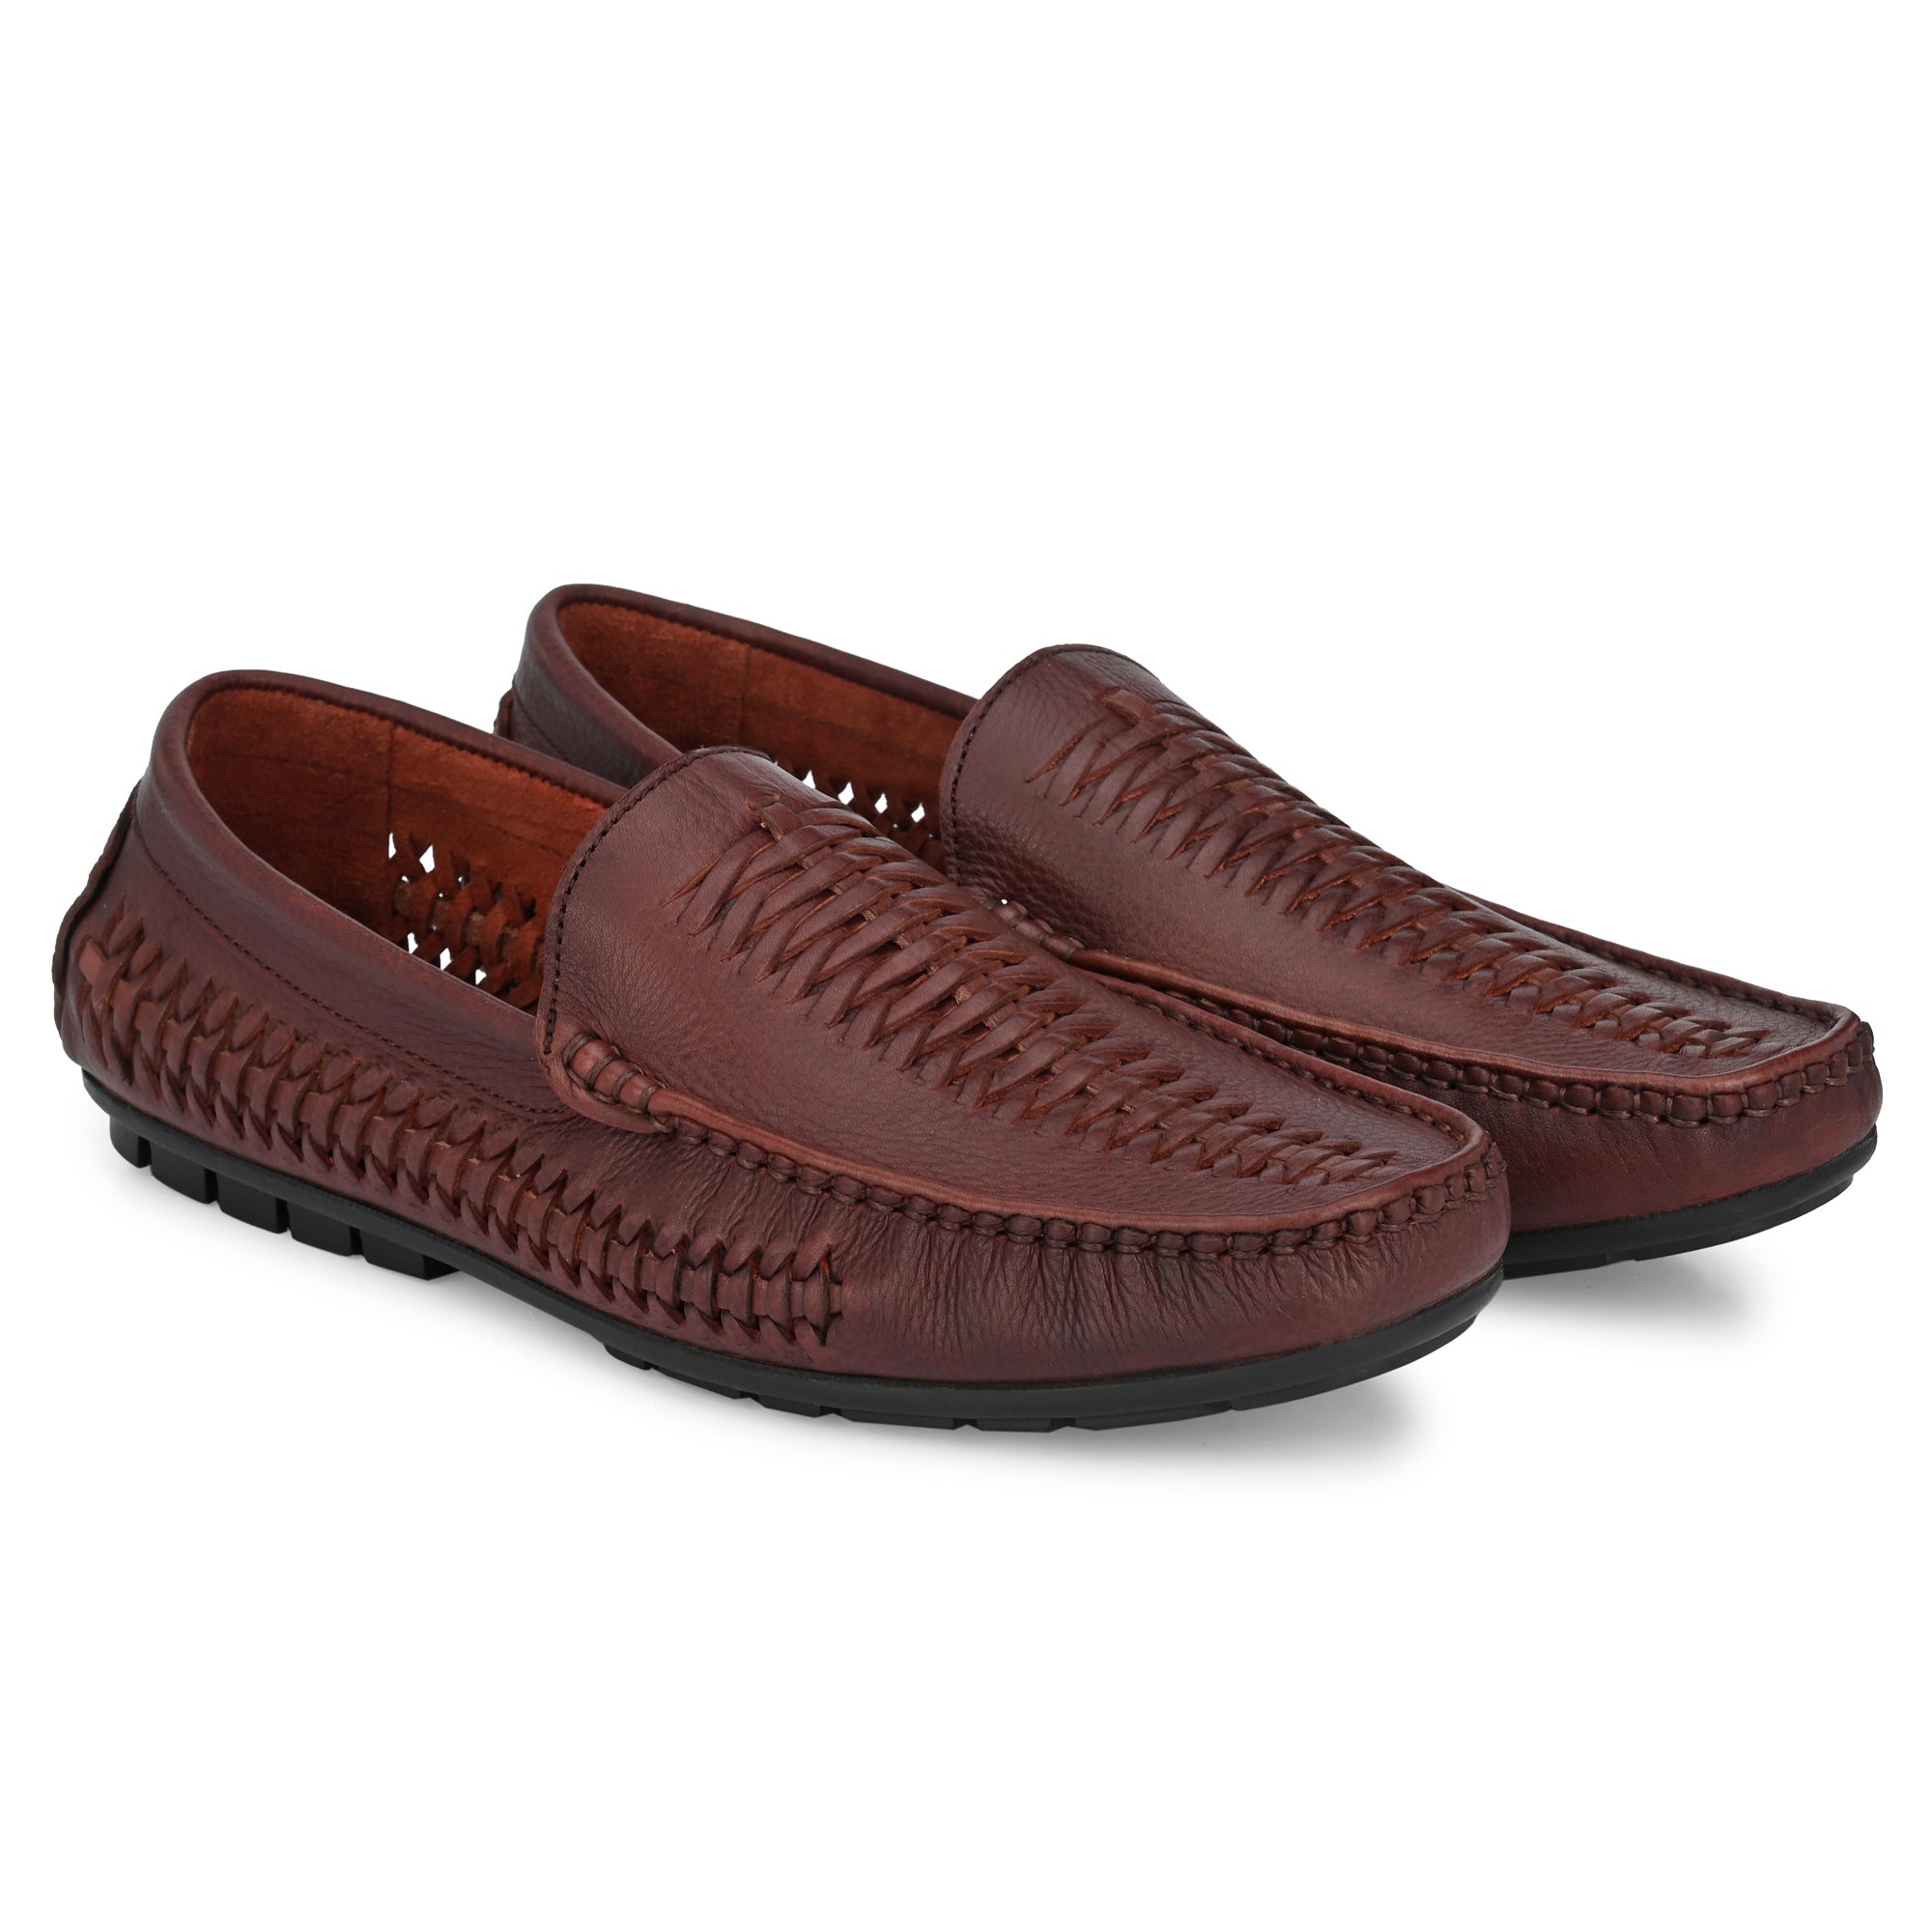 Egoss Casual Leather Slip-on Shoes Loafers For Men